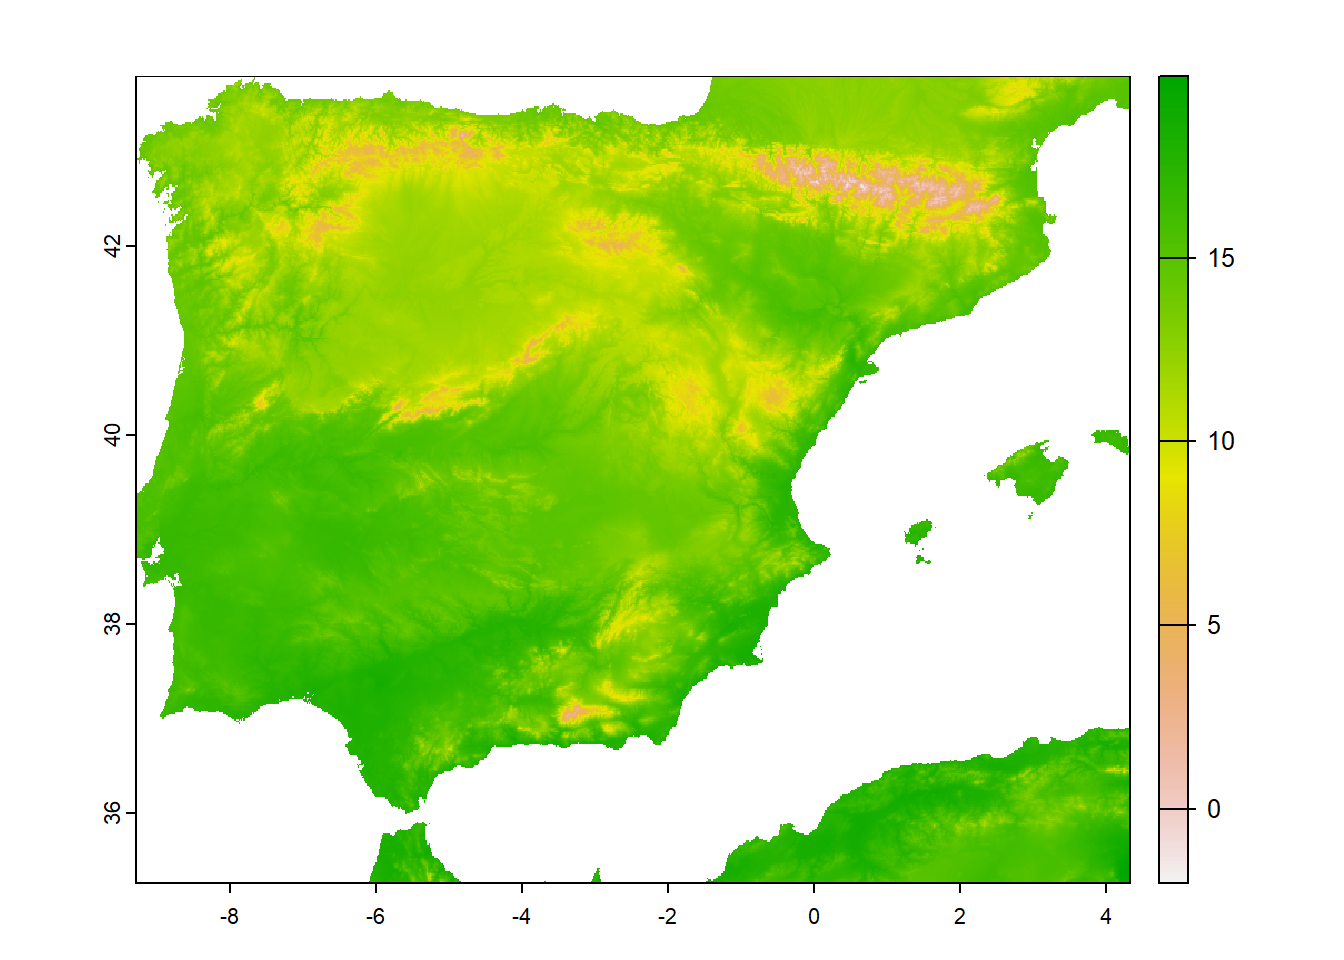 Map of Spain excluding the Canary Islands region (top-left), and cropped raster (top-right), masked raster (bottom-left), and low resolution raster (bottom-right) representing the average annual temperature in the map.